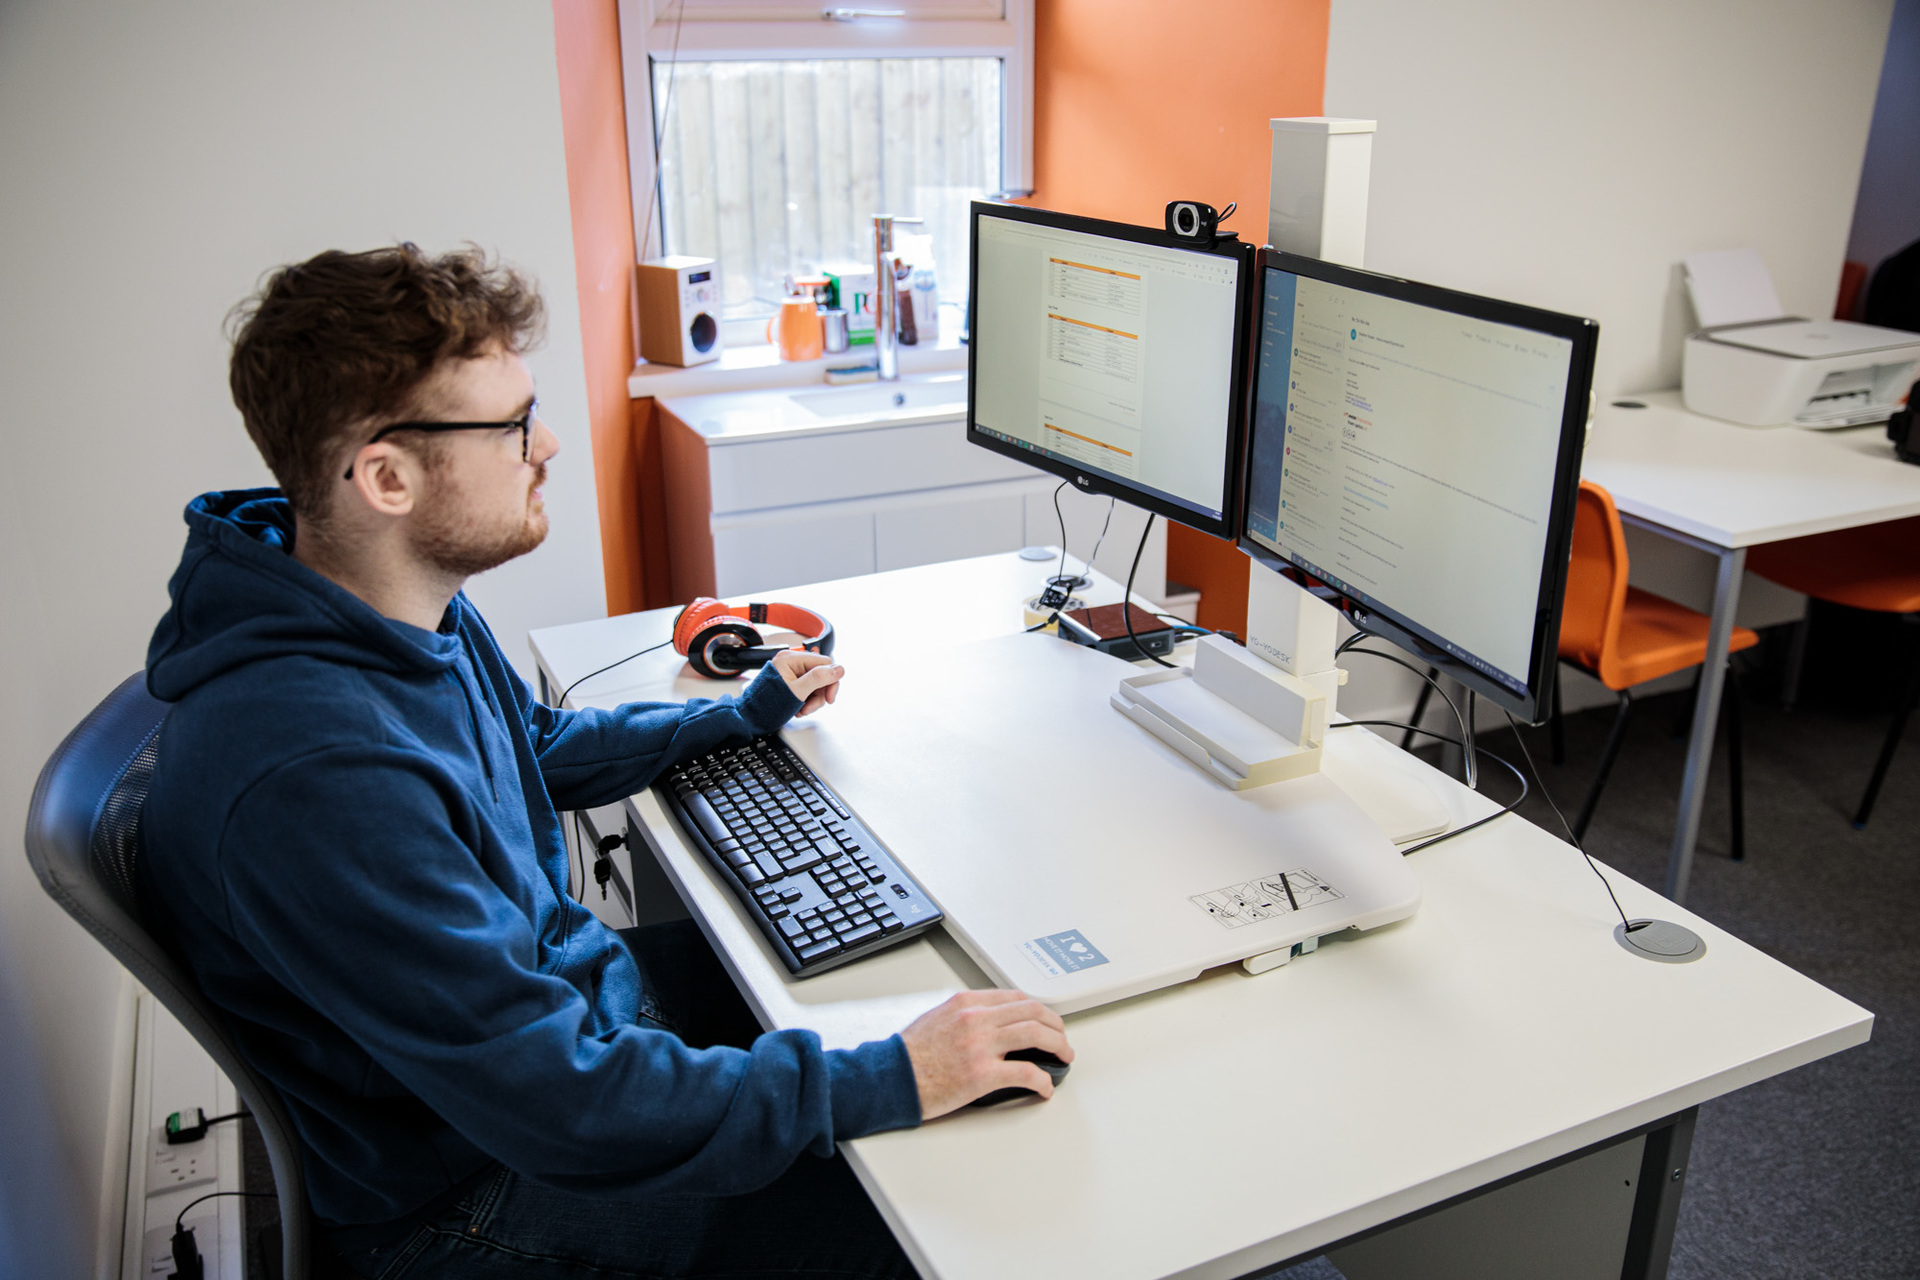 A man sat at a desk on a computer working